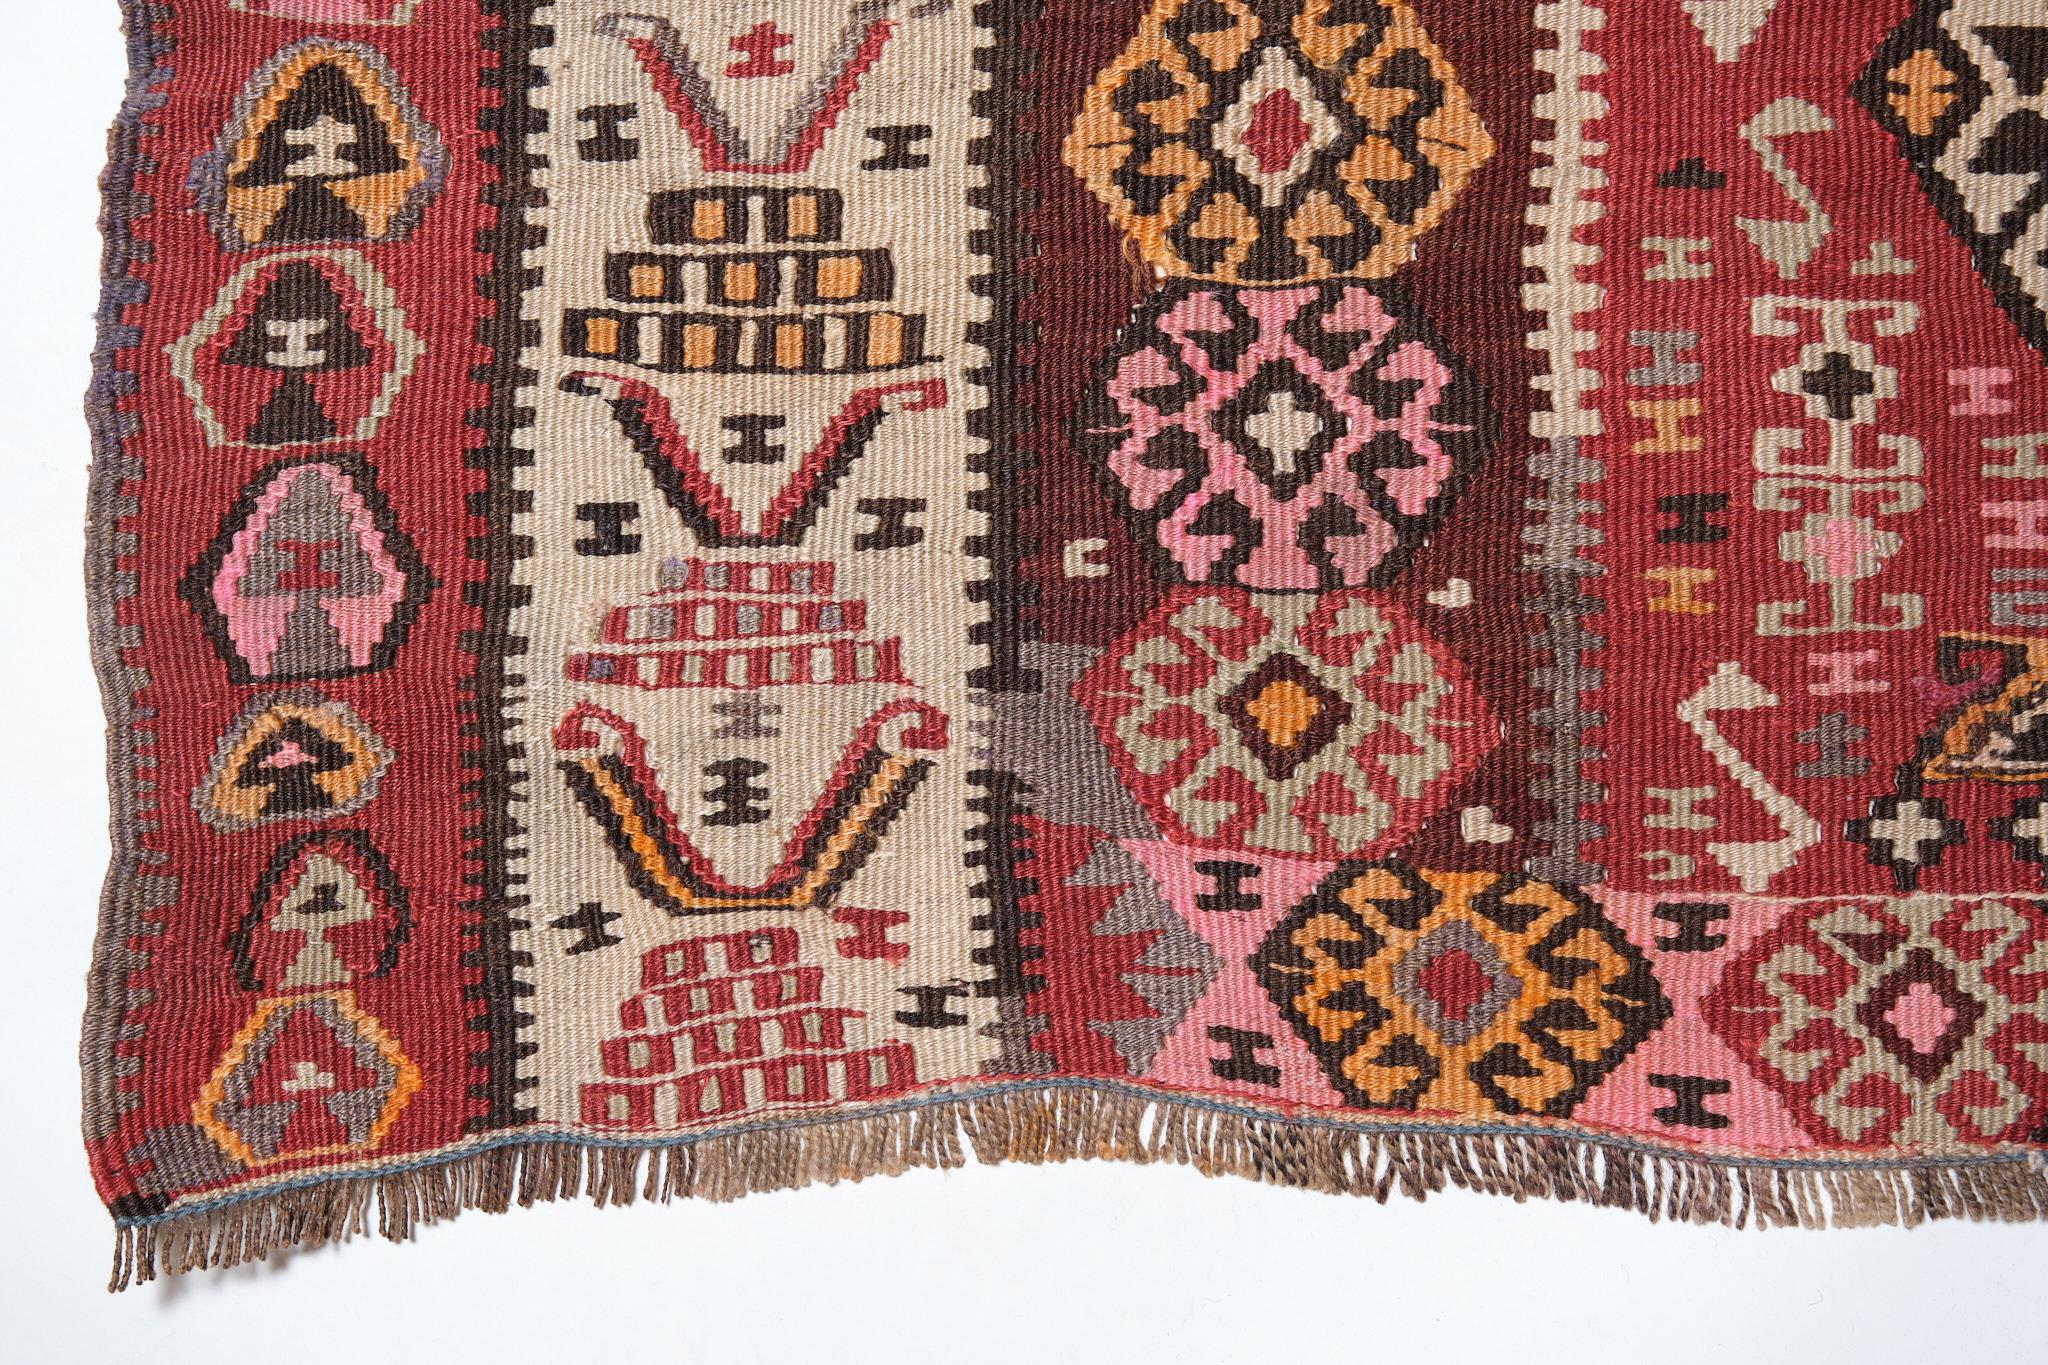 This is an Eastern Anatolian Vintage Old Kilim from the Erzurum region with a rare and beautiful color composition.

Erzurum was once a key frontier town, used to defend Anatolia against many invasions, and was also an important point on the